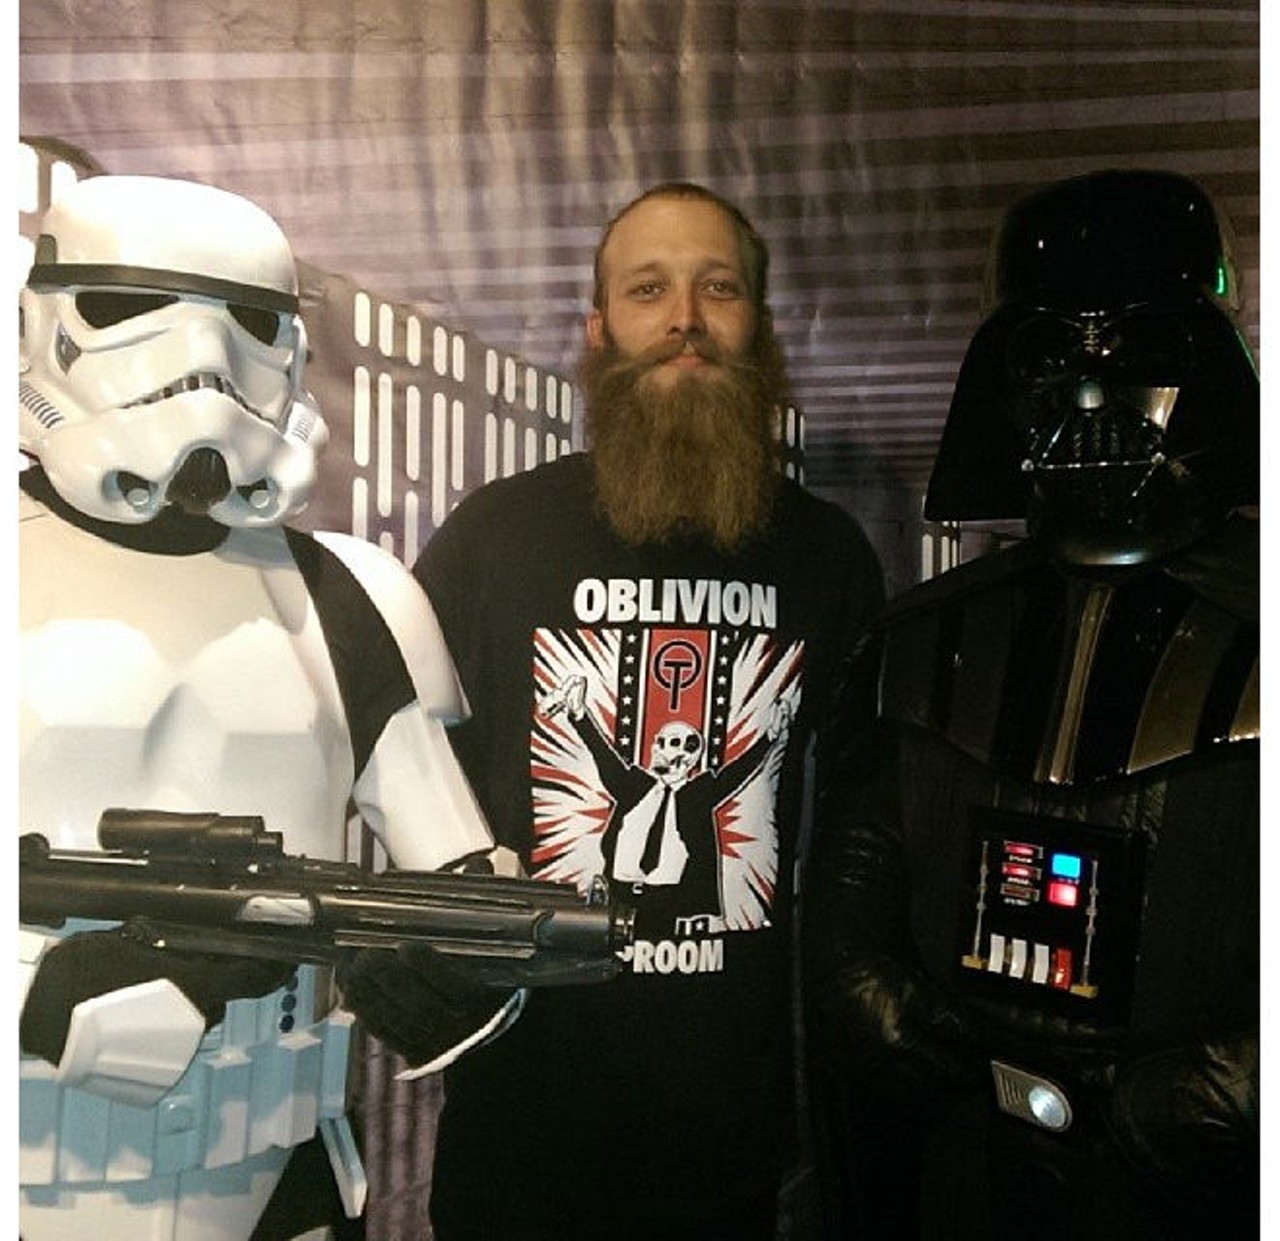 May the 4th Party at Oblivion Taproom
Instagram: florida_native64